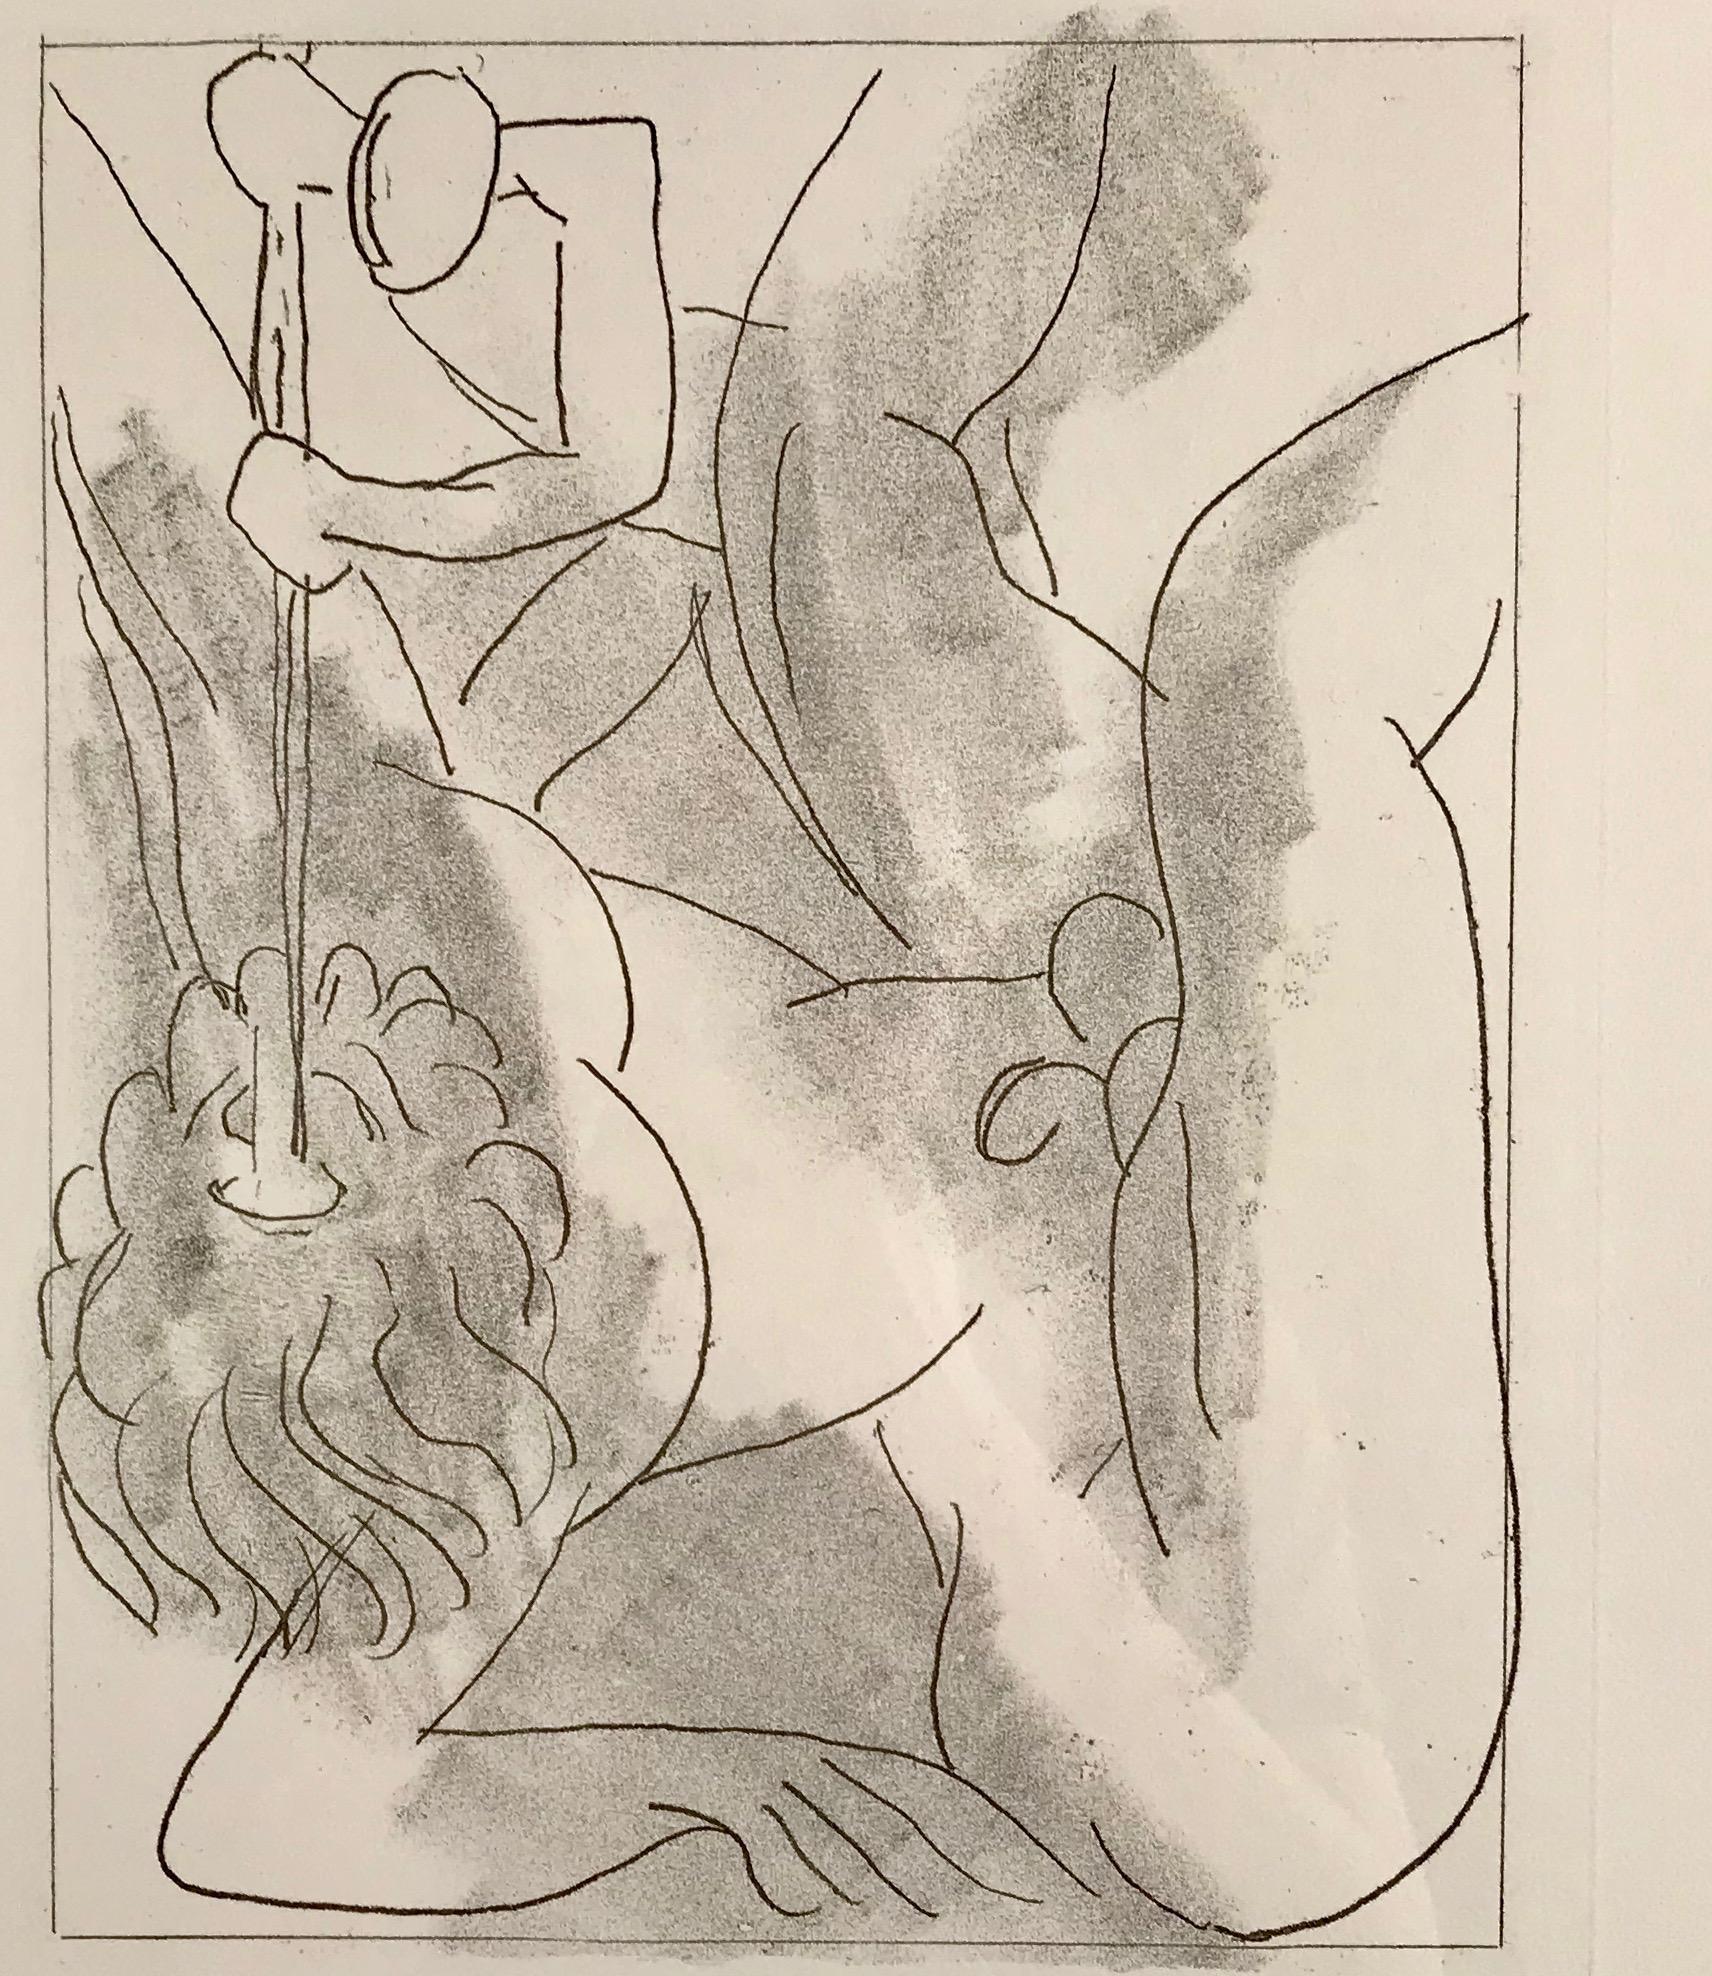 This piece is an original soft-ground etching by Henri Matisse, done in 1935. This image was created to illustrate James Joyce's "Ulysses", which is based on Greek mythologies. Specifically this piece illustrates Odysseus removing the eye of the